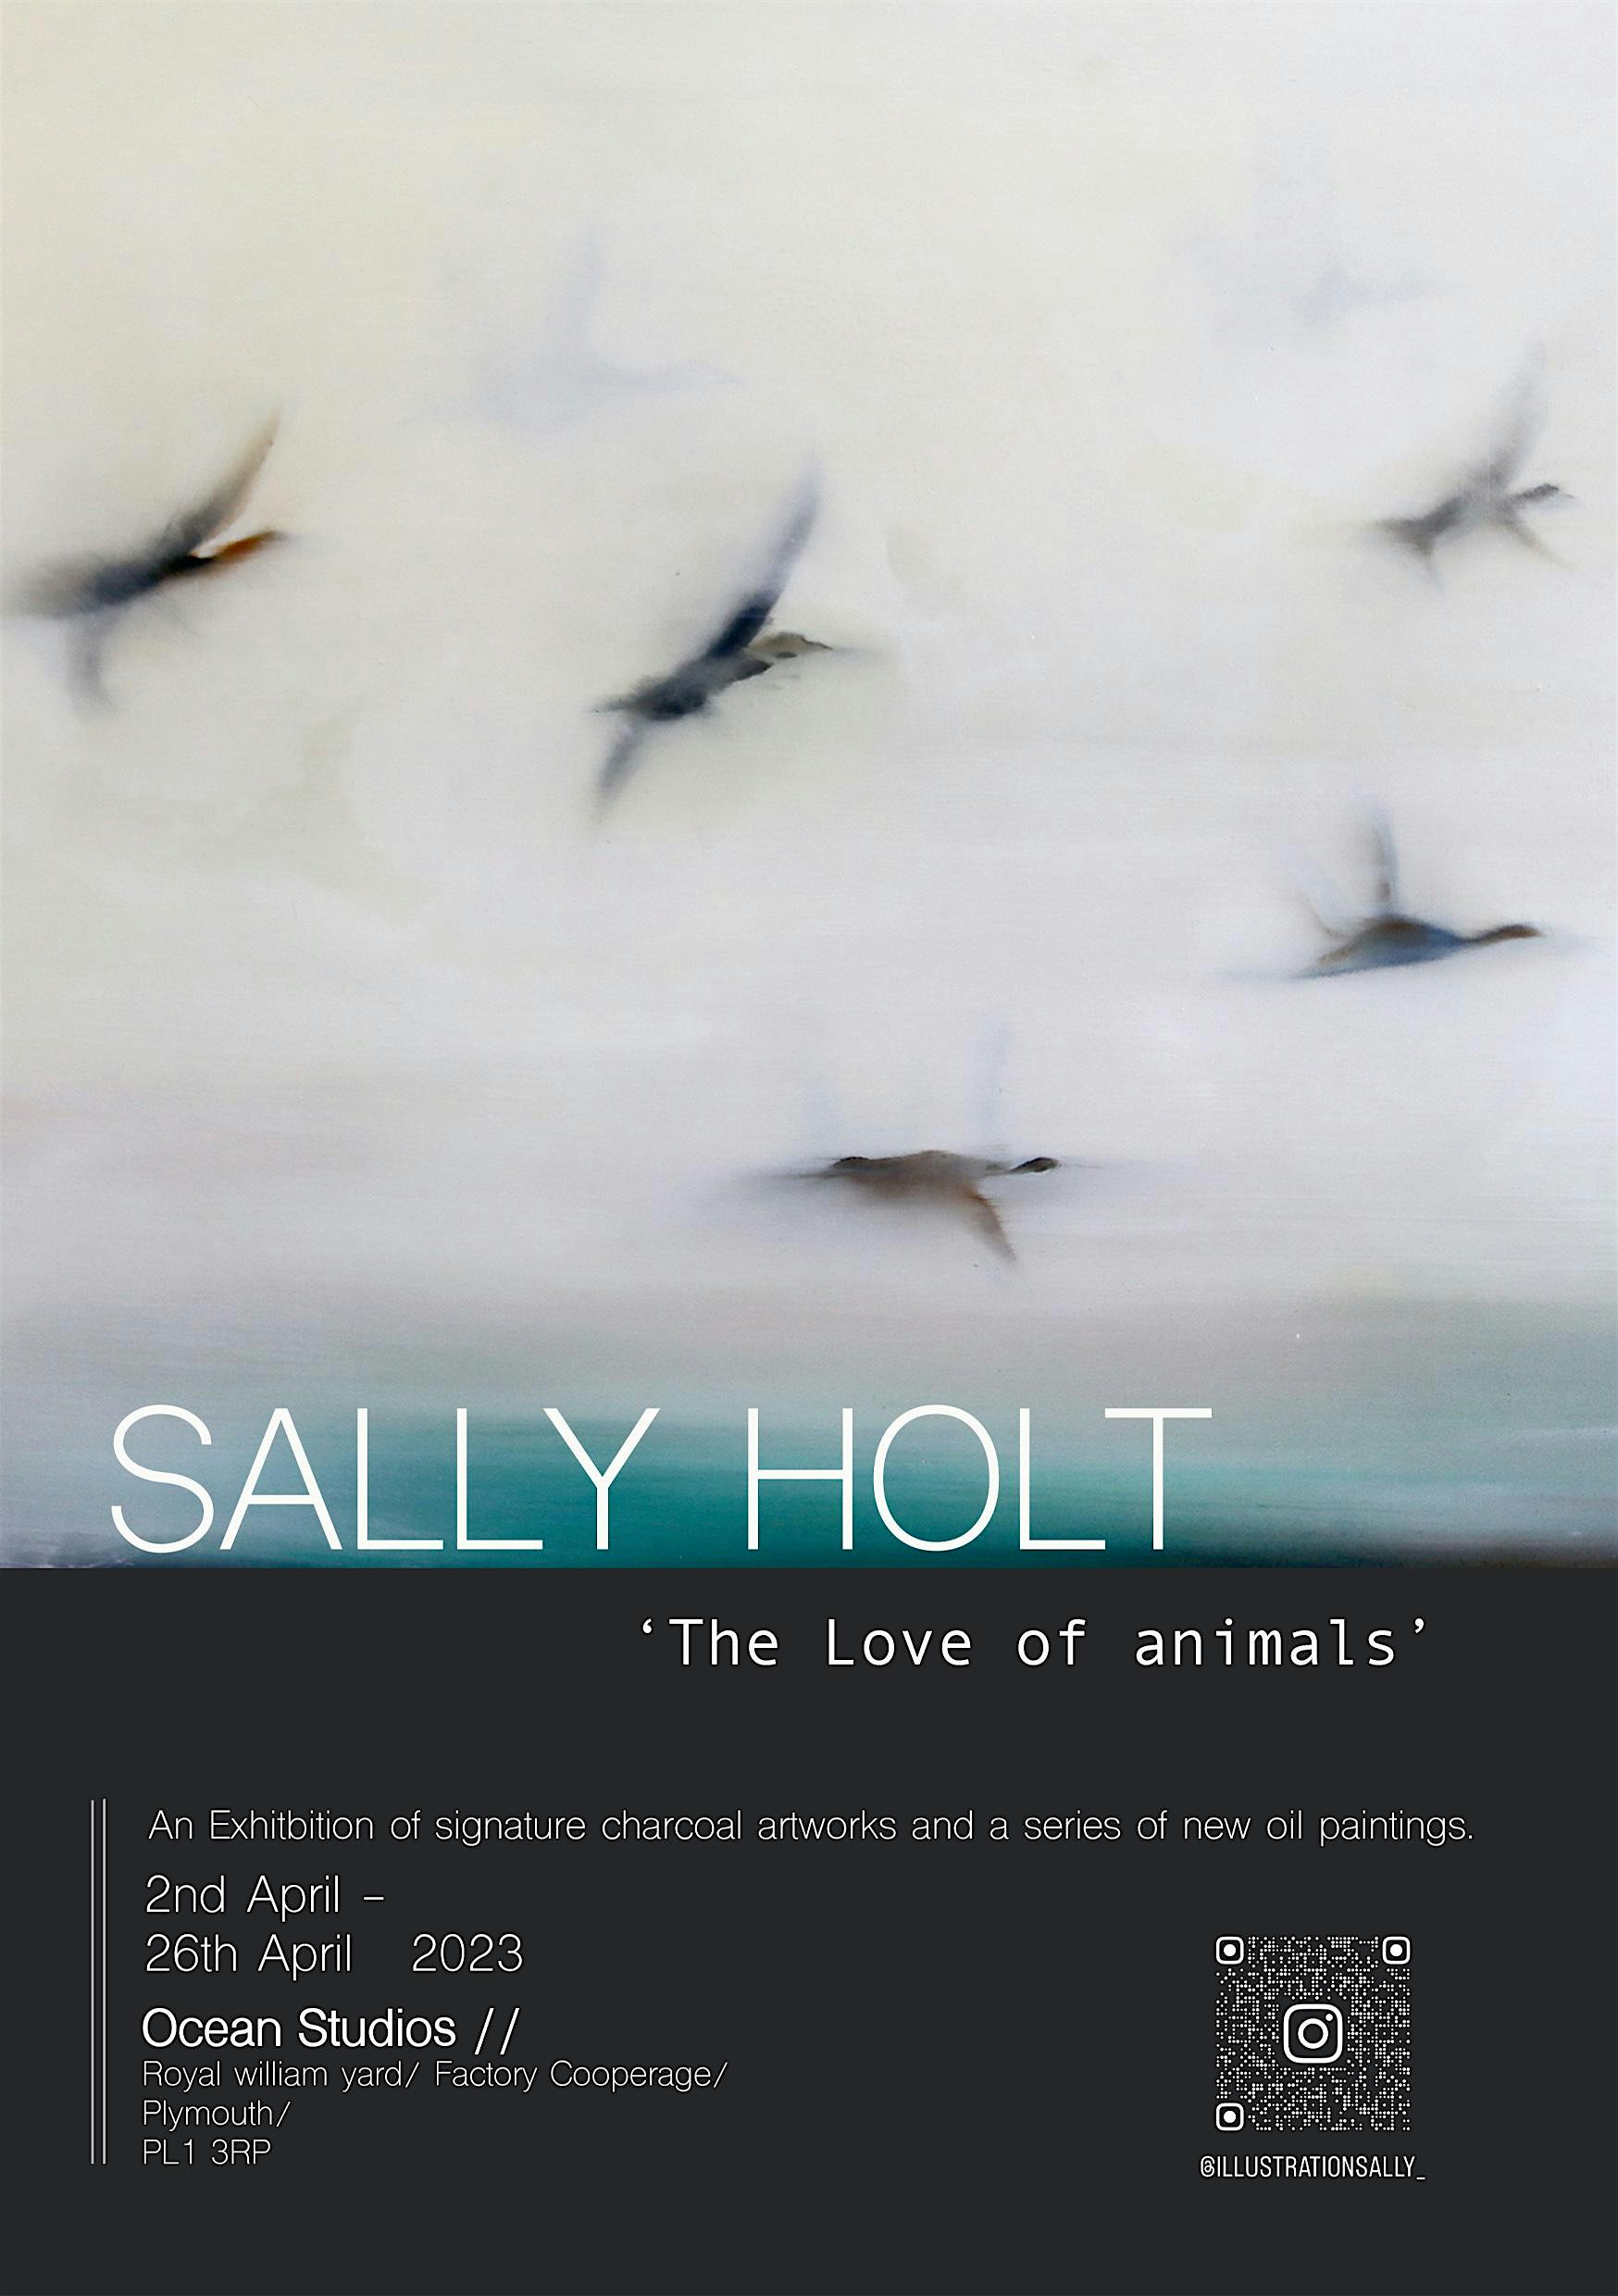 Exhibition: The Love of Animals